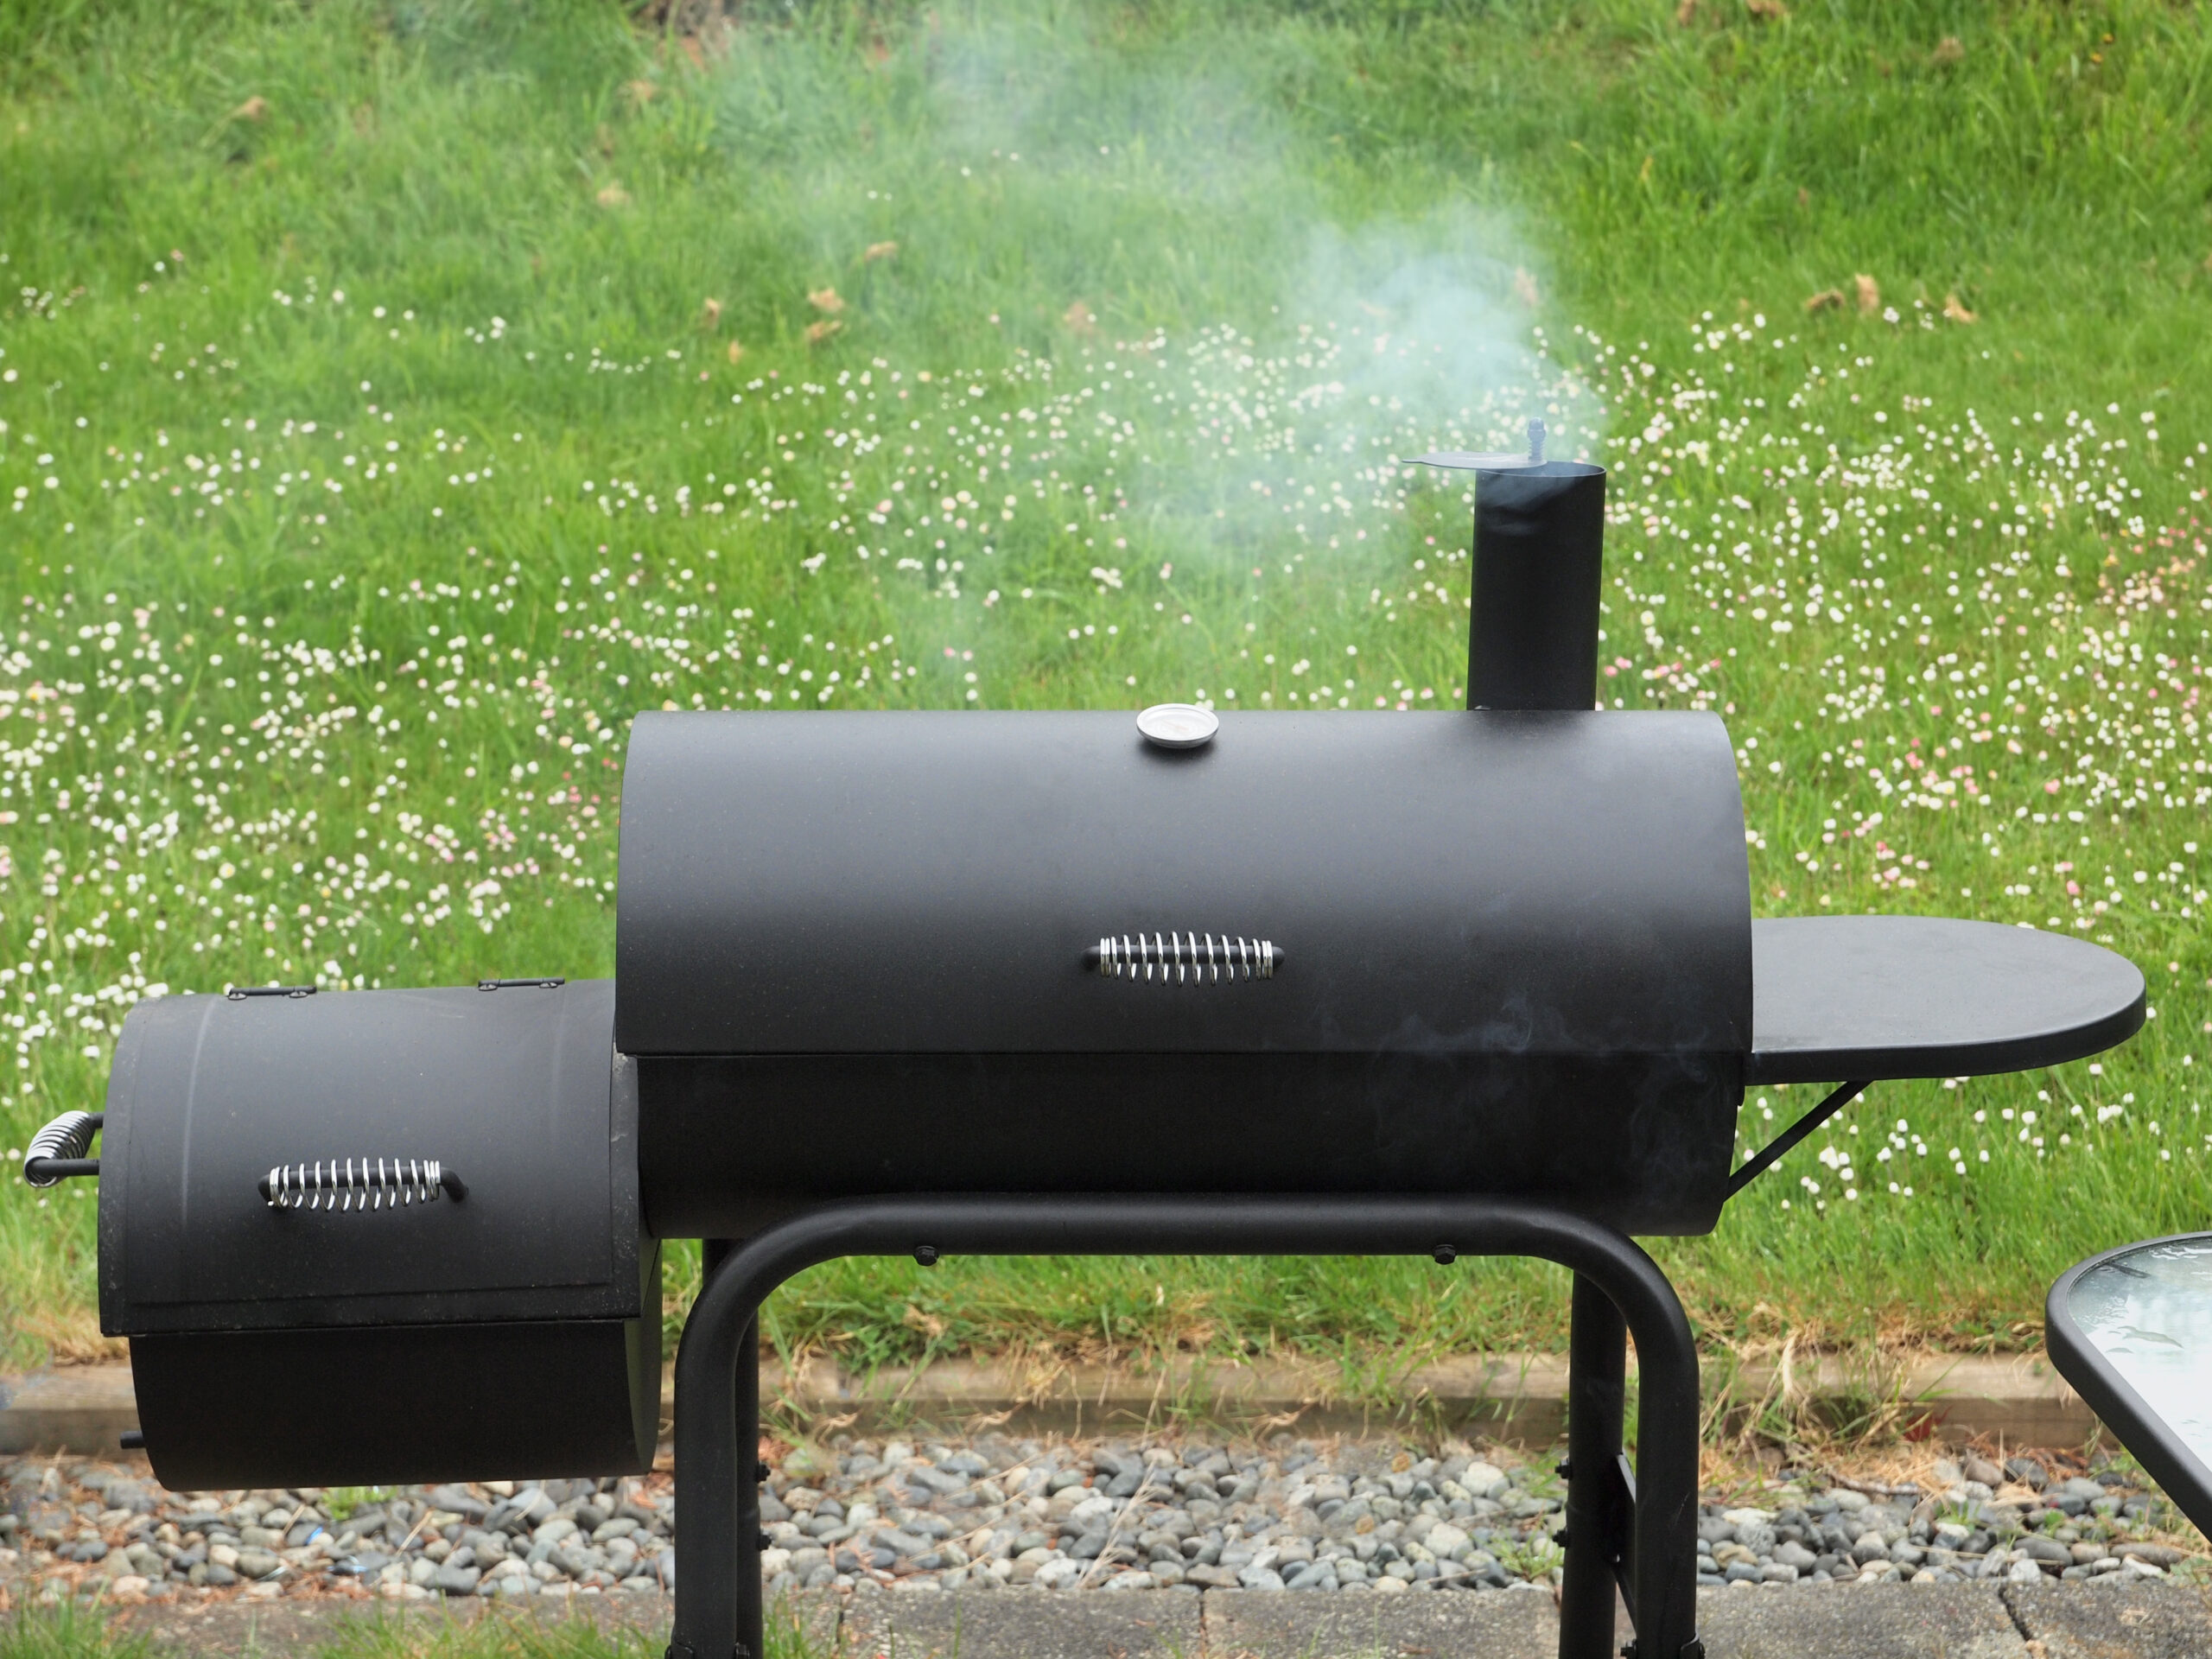 This high-quality smoker, expertly designed for wood-fired mastery, ensures your turkey emerges tender, juicy, and bursting with smoky goodness.